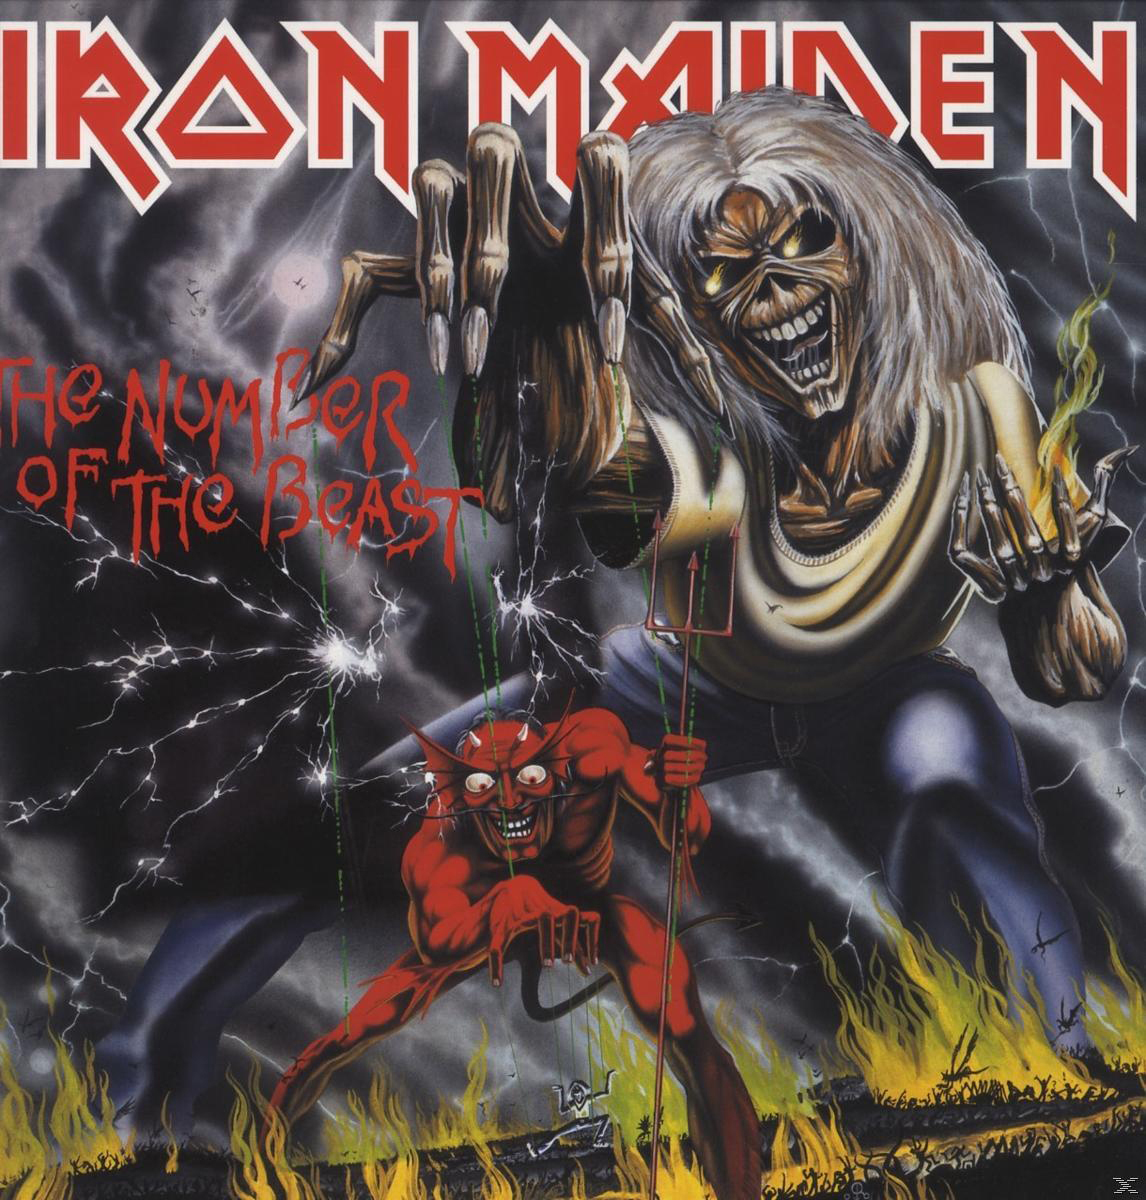 Of The Iron (Vinyl) Number Maiden - The - Beast